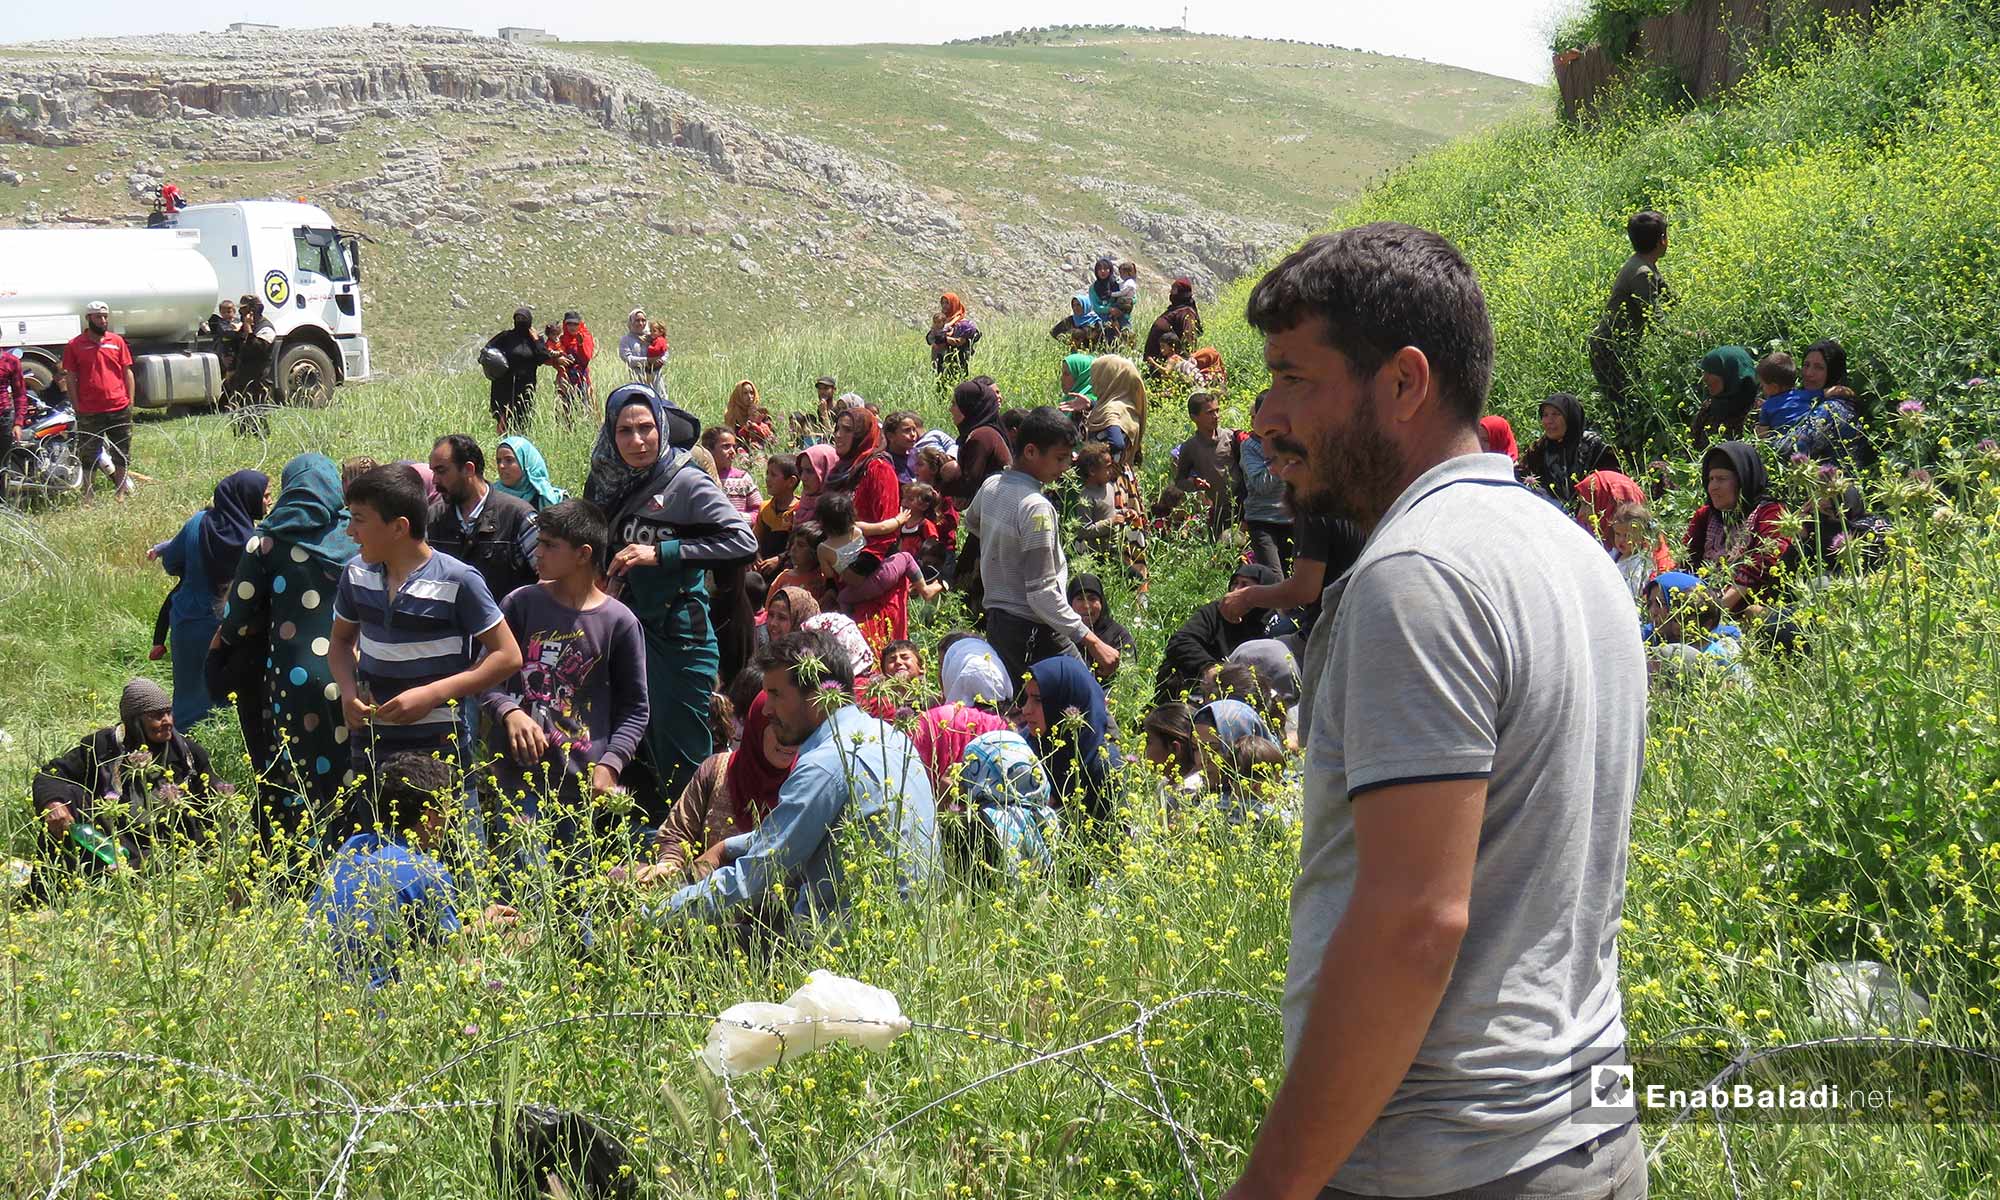 Civilians displaced to the vicinity of the Turkish observation point in Shair al-Maghar, western Hama, fleeing the shelling – April 29, 2019 (Enab Baladi)

